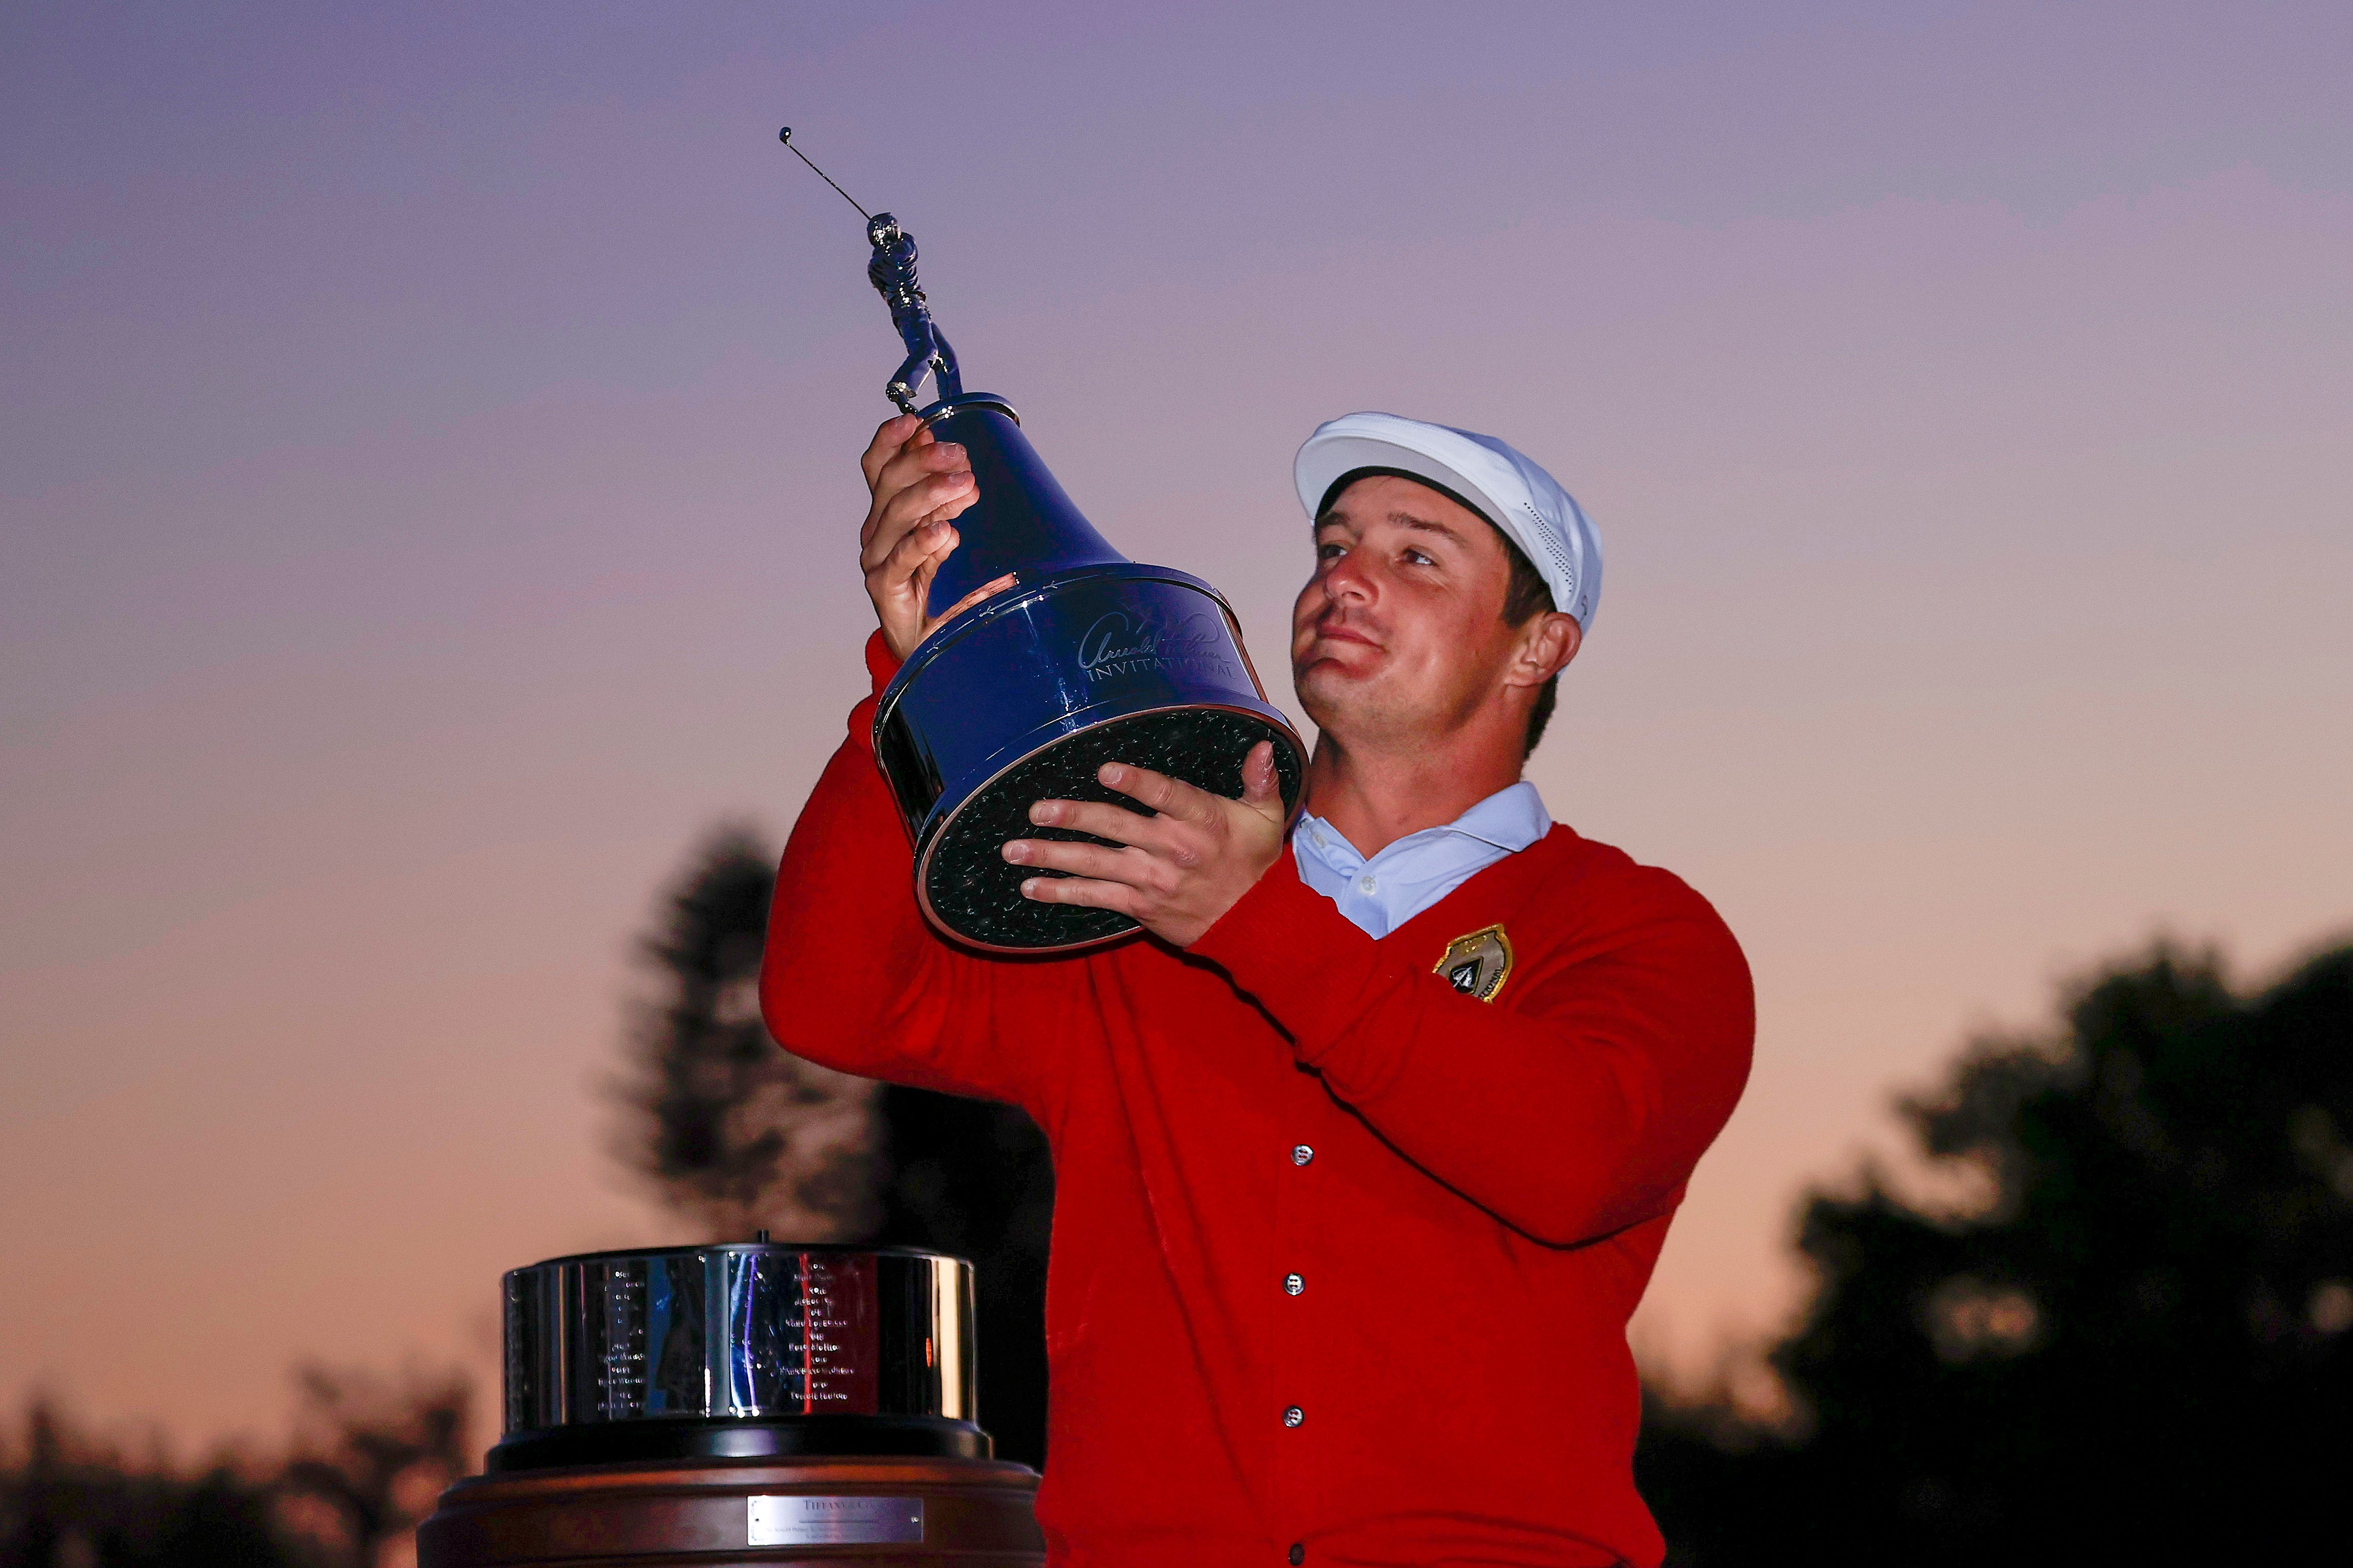 Bryson DeChambeau celebrates with the trophy after winning the 2021 Arnold Palmer Invitational